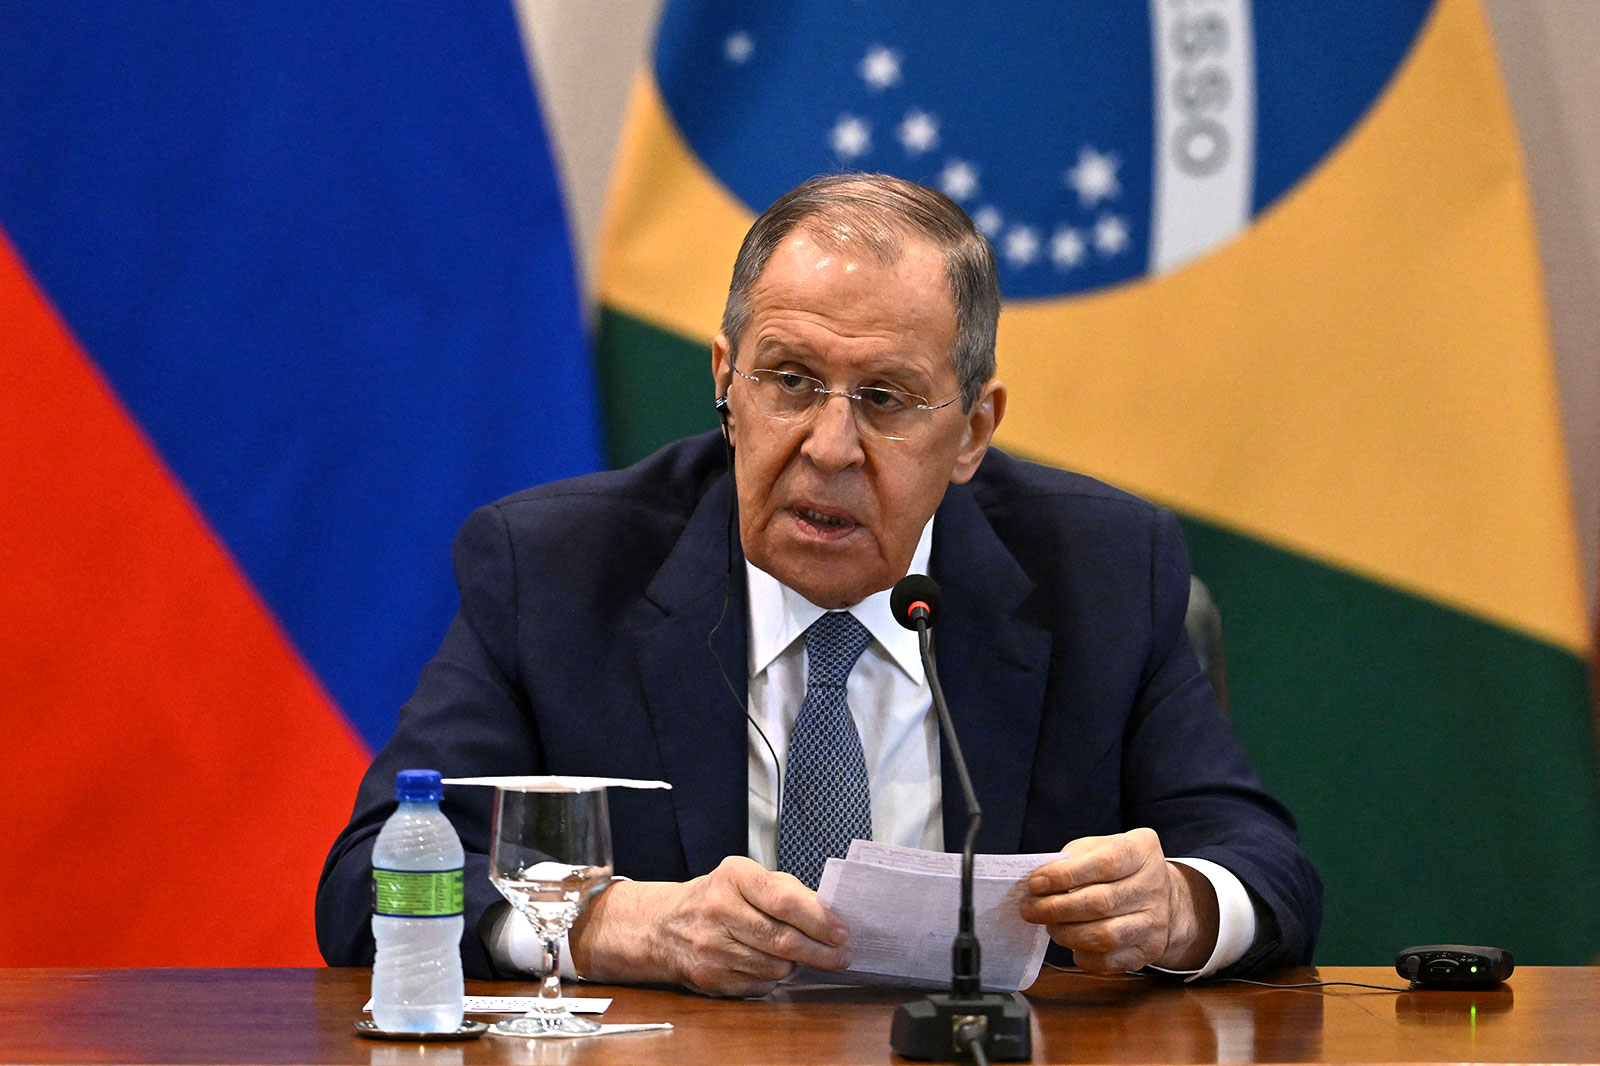 Russian Foreign Minister Sergey Lavrov speaks during a press conference in Brasilia on April 17.